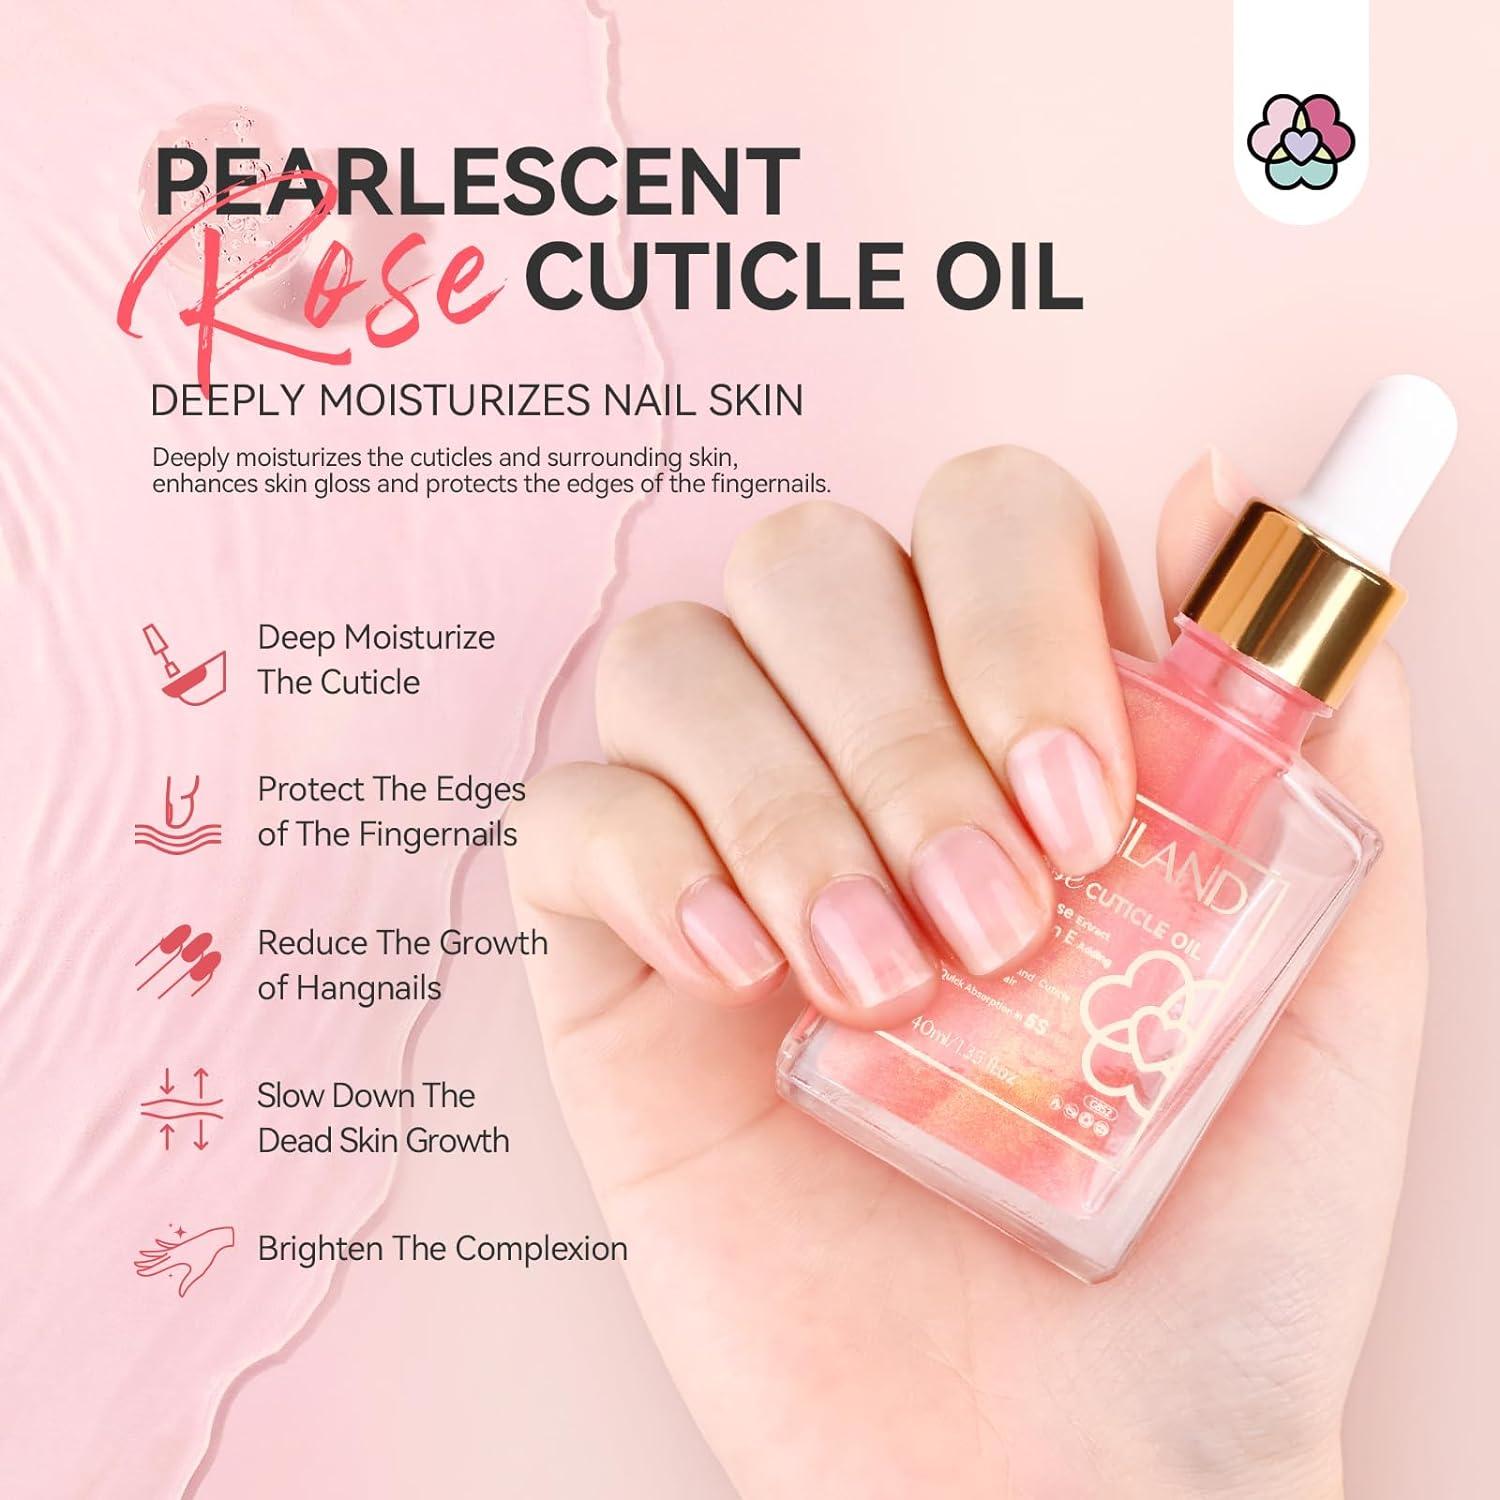 Cuticle Oil for Nails, 2.7 Fl. Oz Cuticle Remover for Strengthening, Gel  Nail Cuticle Oil Care for Dry, Damaged Cuticles, Stronger Nails Spa and  Hand Manicure for Repaired Thin Lear-au : Amazon.com.au: